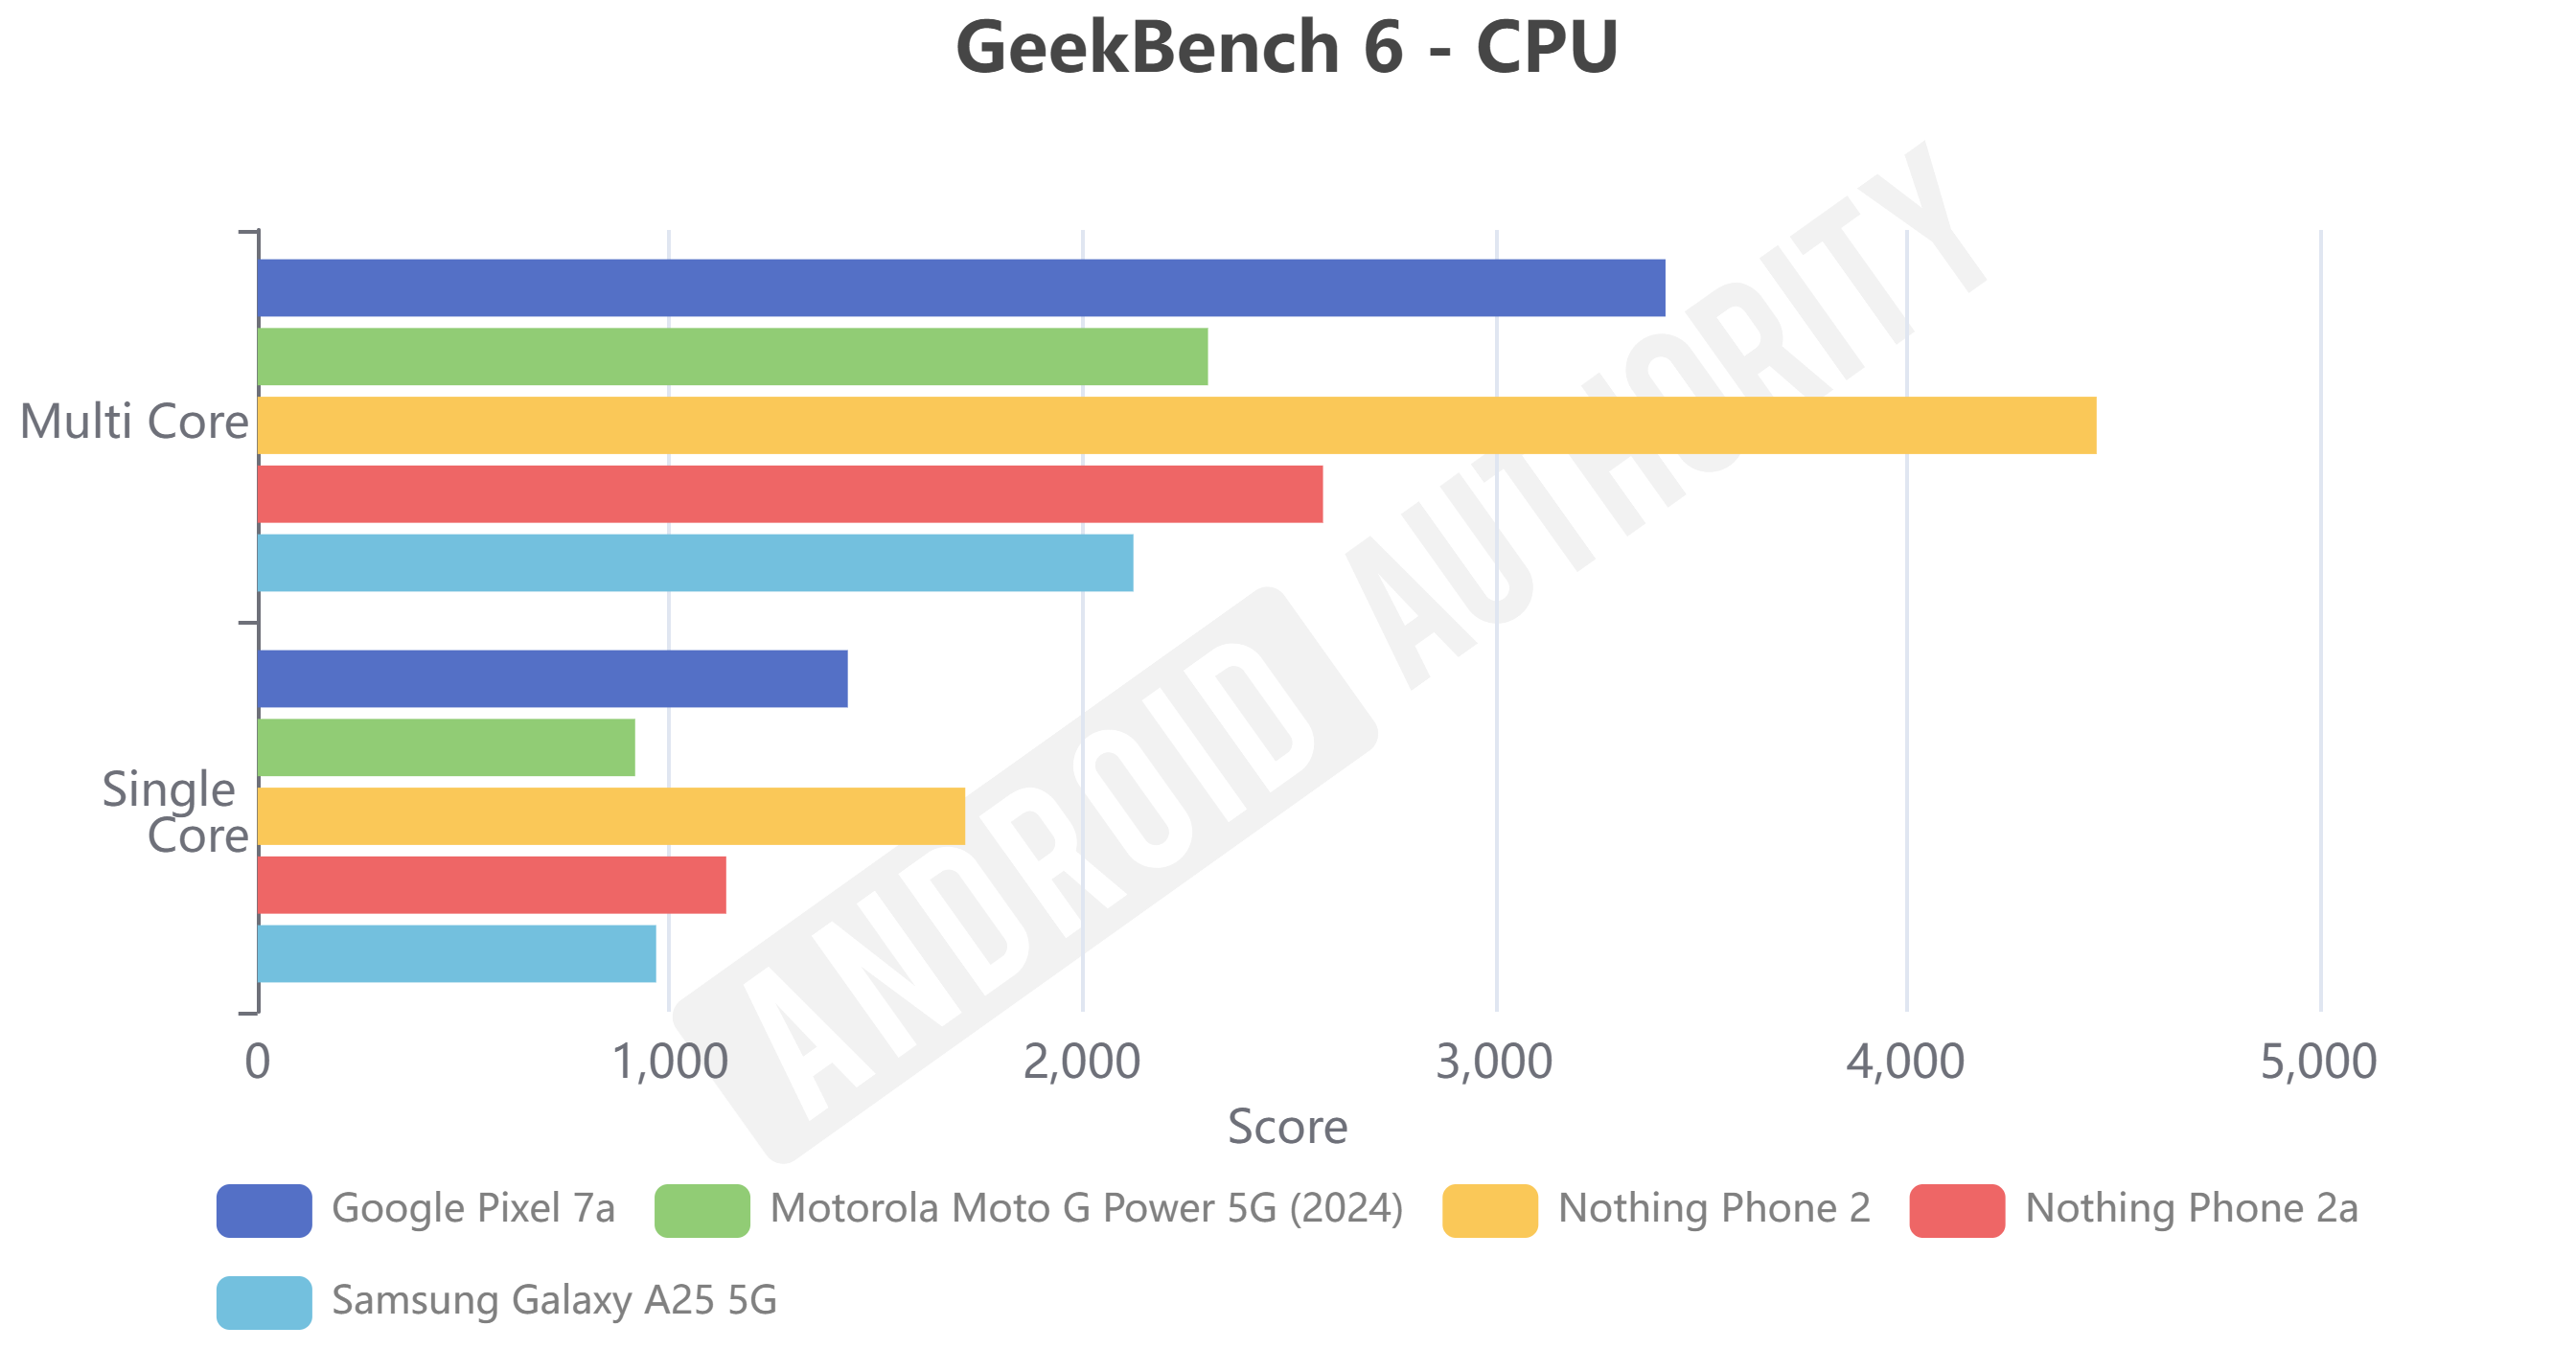 Nothing Phone 2a GeekBench 6